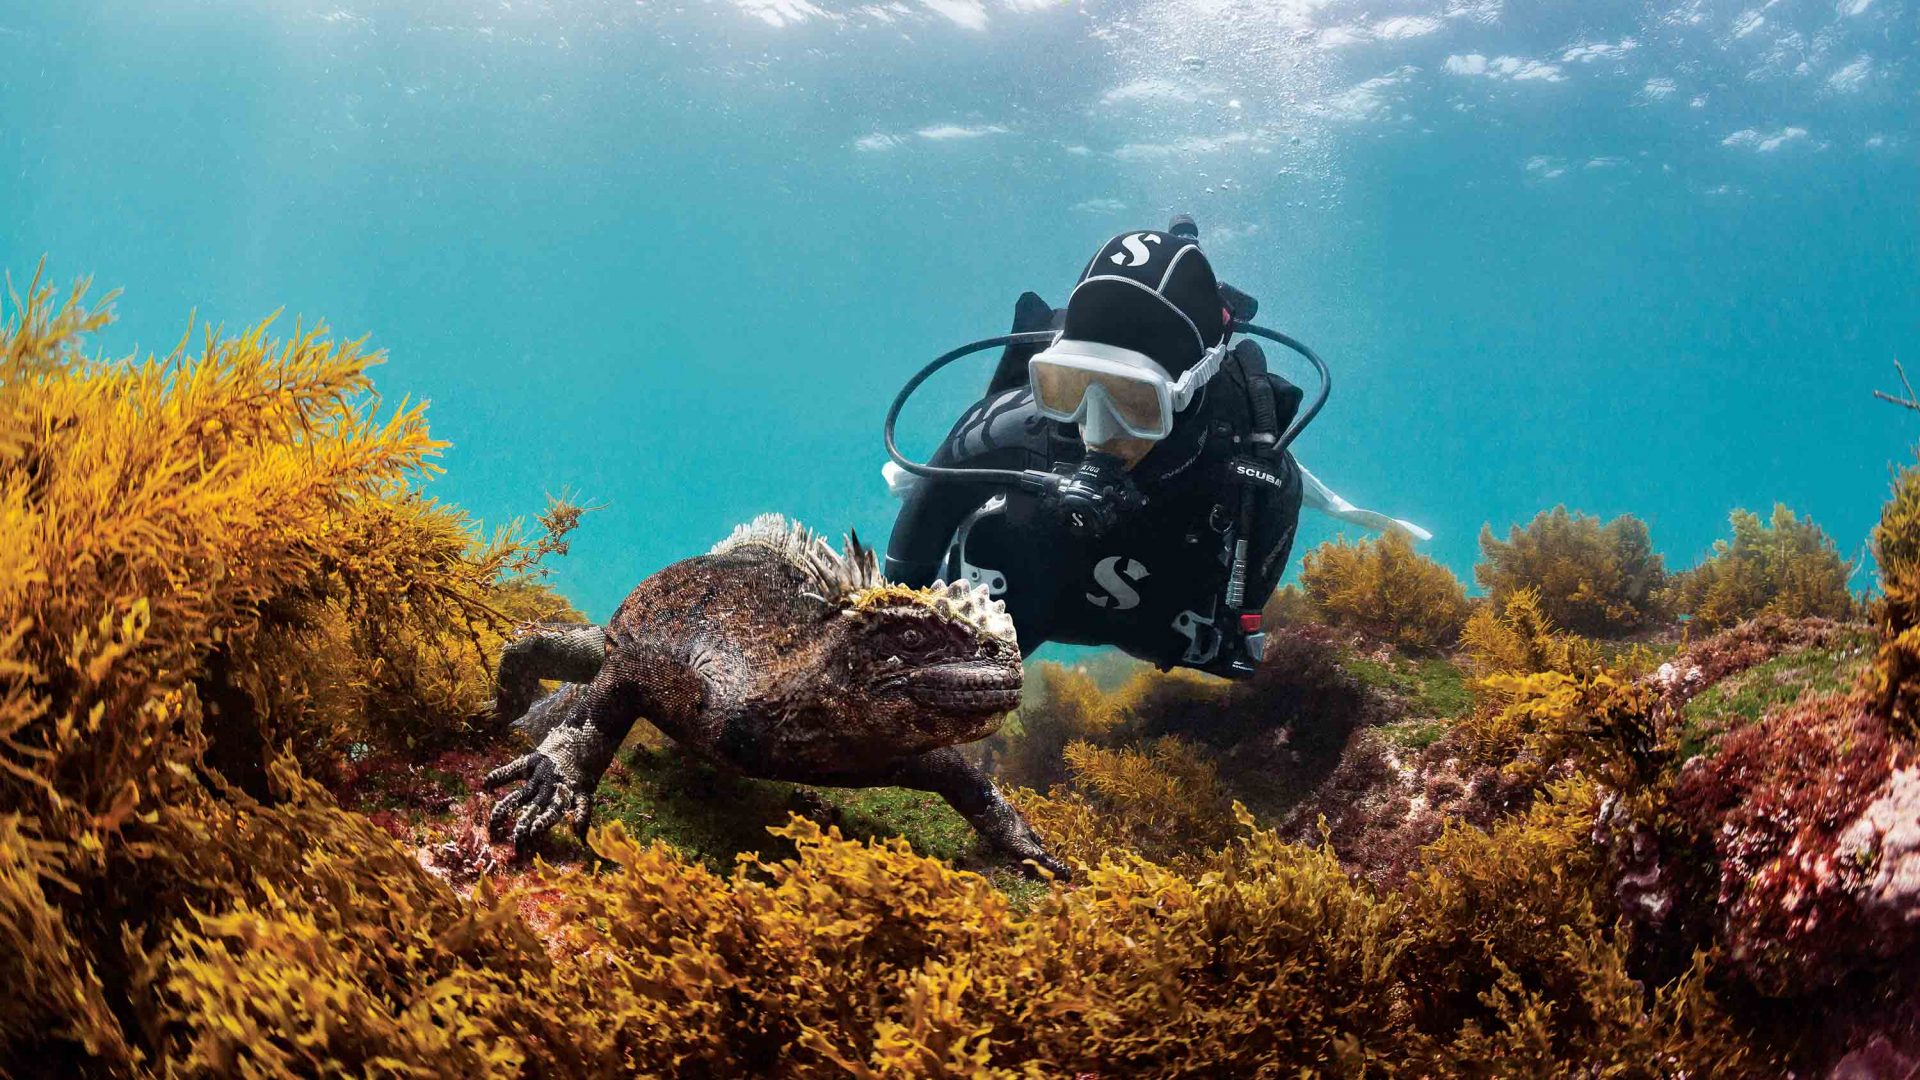 A diver gets up close with the marine life.